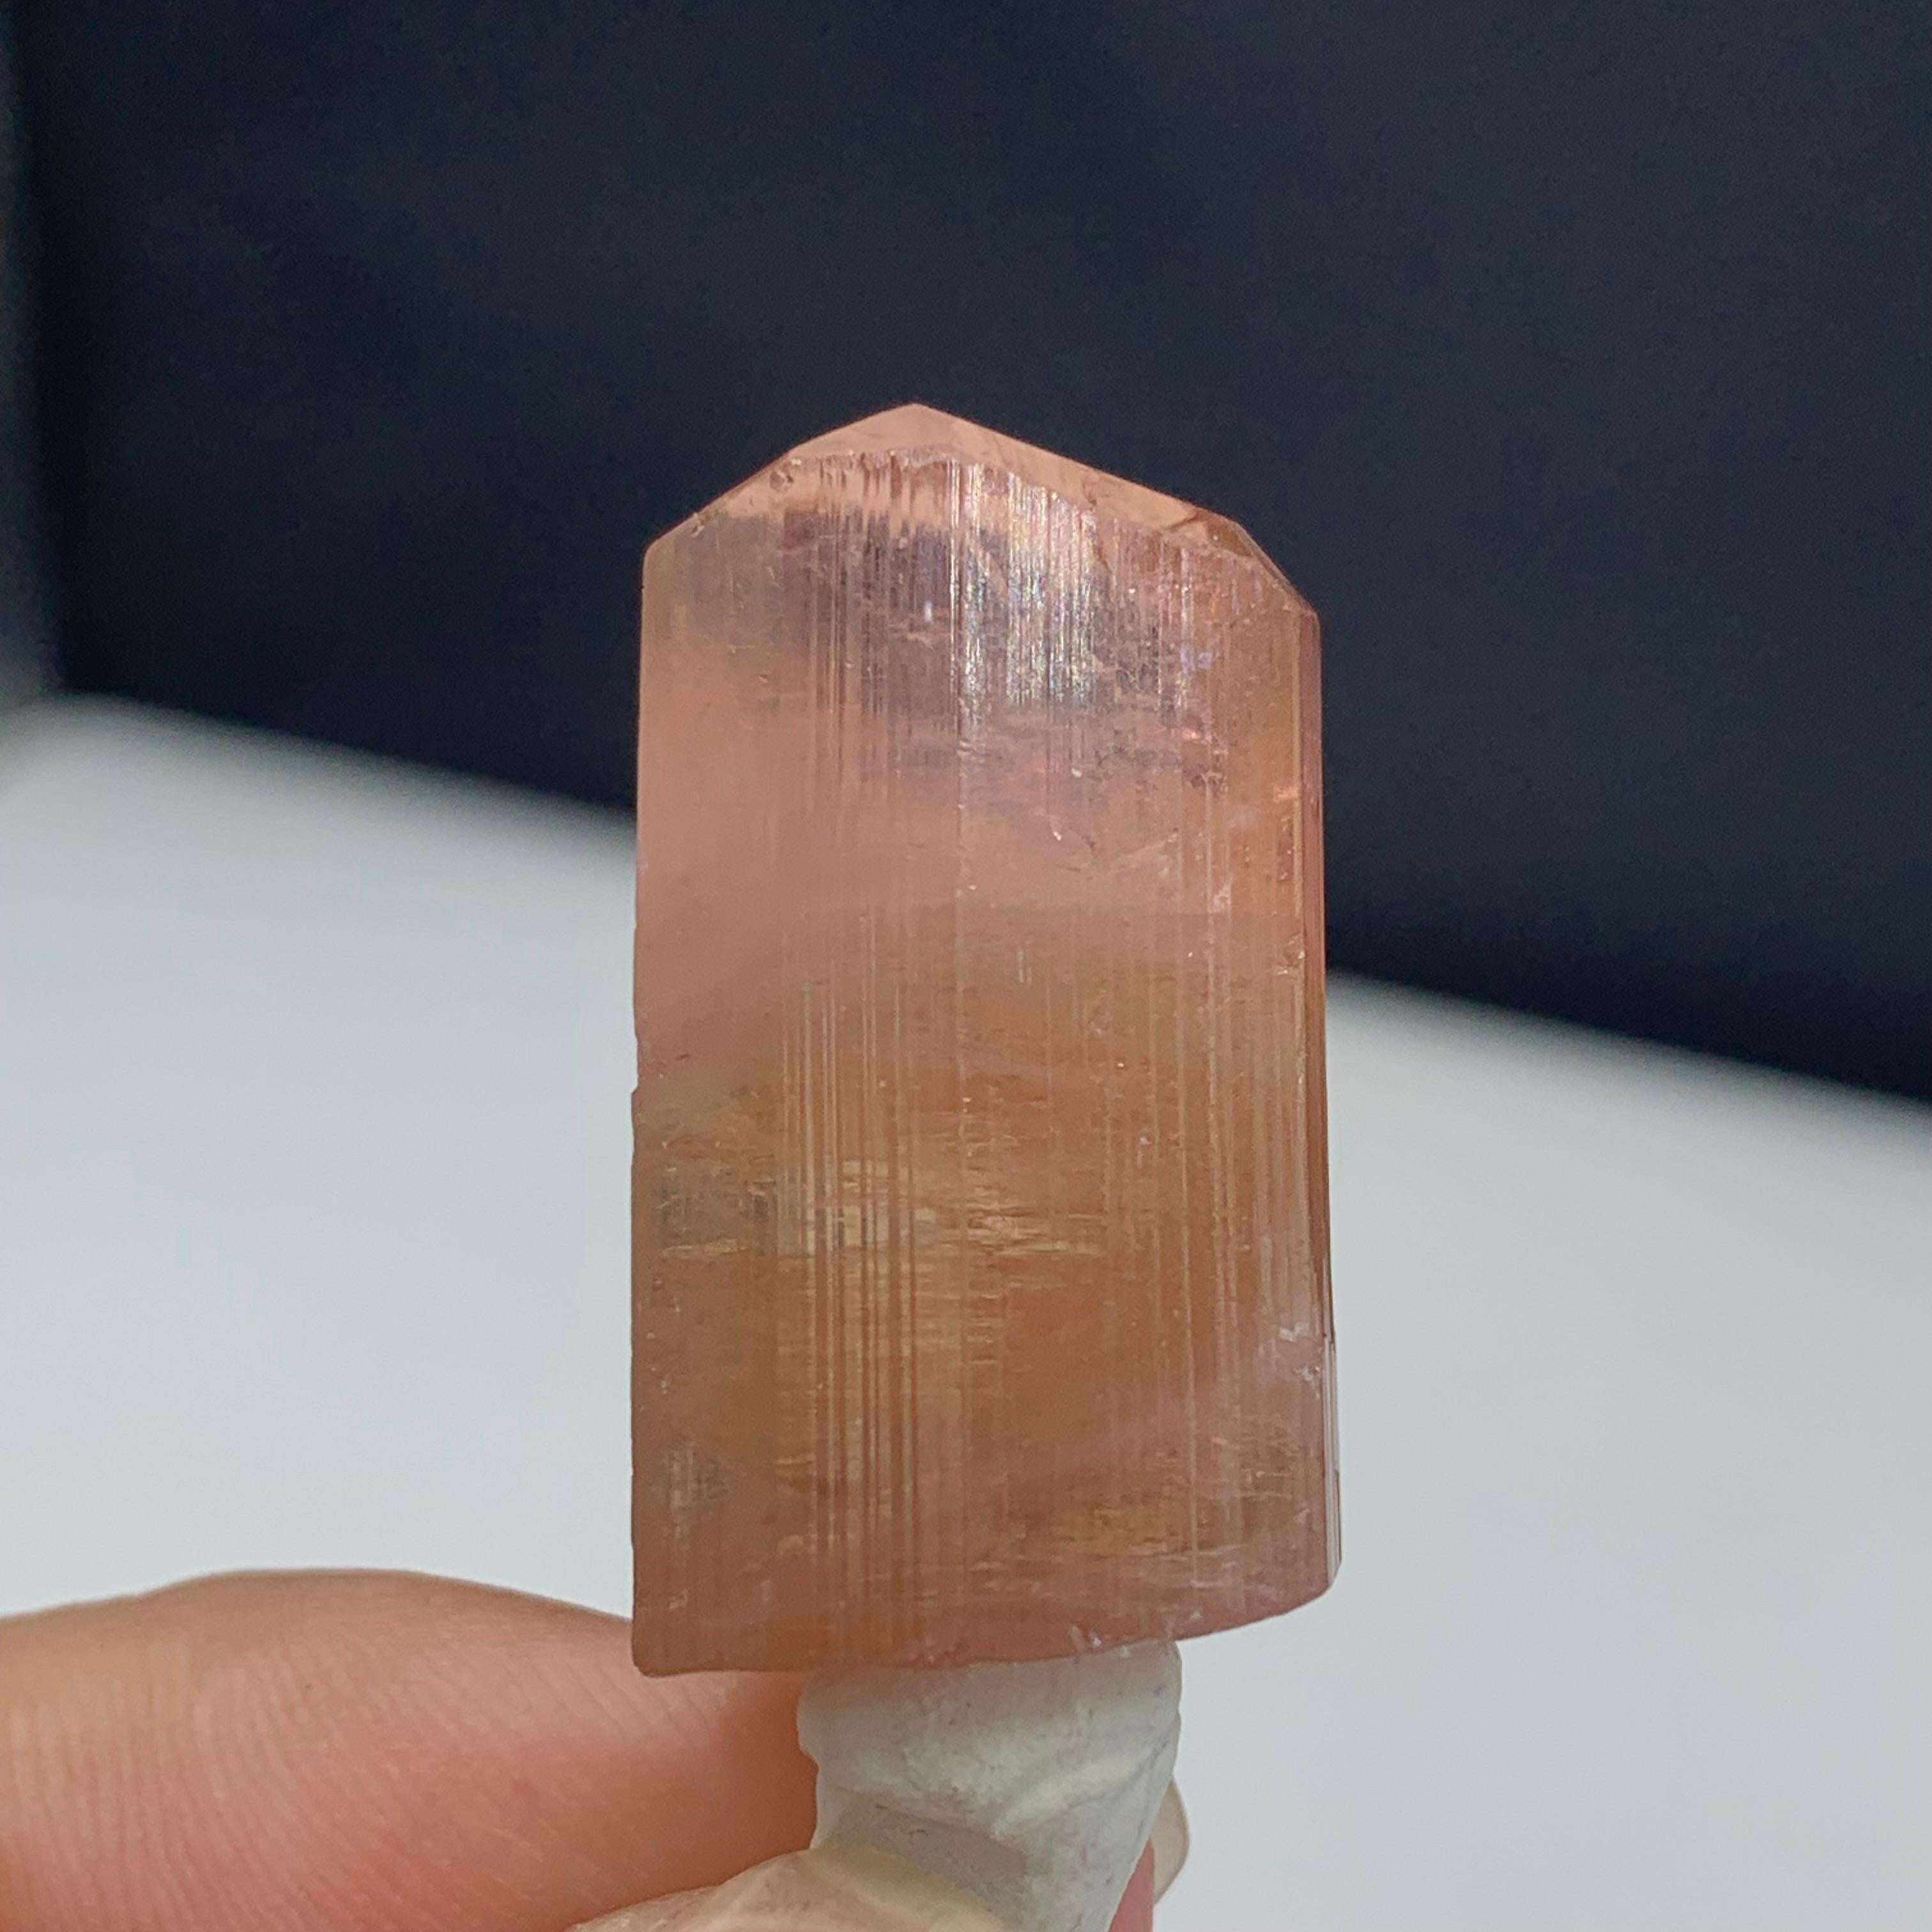 Amazing Peach Color Terminated Tourmaline Crystal From Afghanistan
WEIGHT: 50.00 Carat
DIMENSIONS: 2.8 x 1.5 x 1 Cm
ORIGIN: Paprook Mine, Afghanistan
Color : Peach
TREATMENT: None

Tourmalines are part of a family of closely related mineral